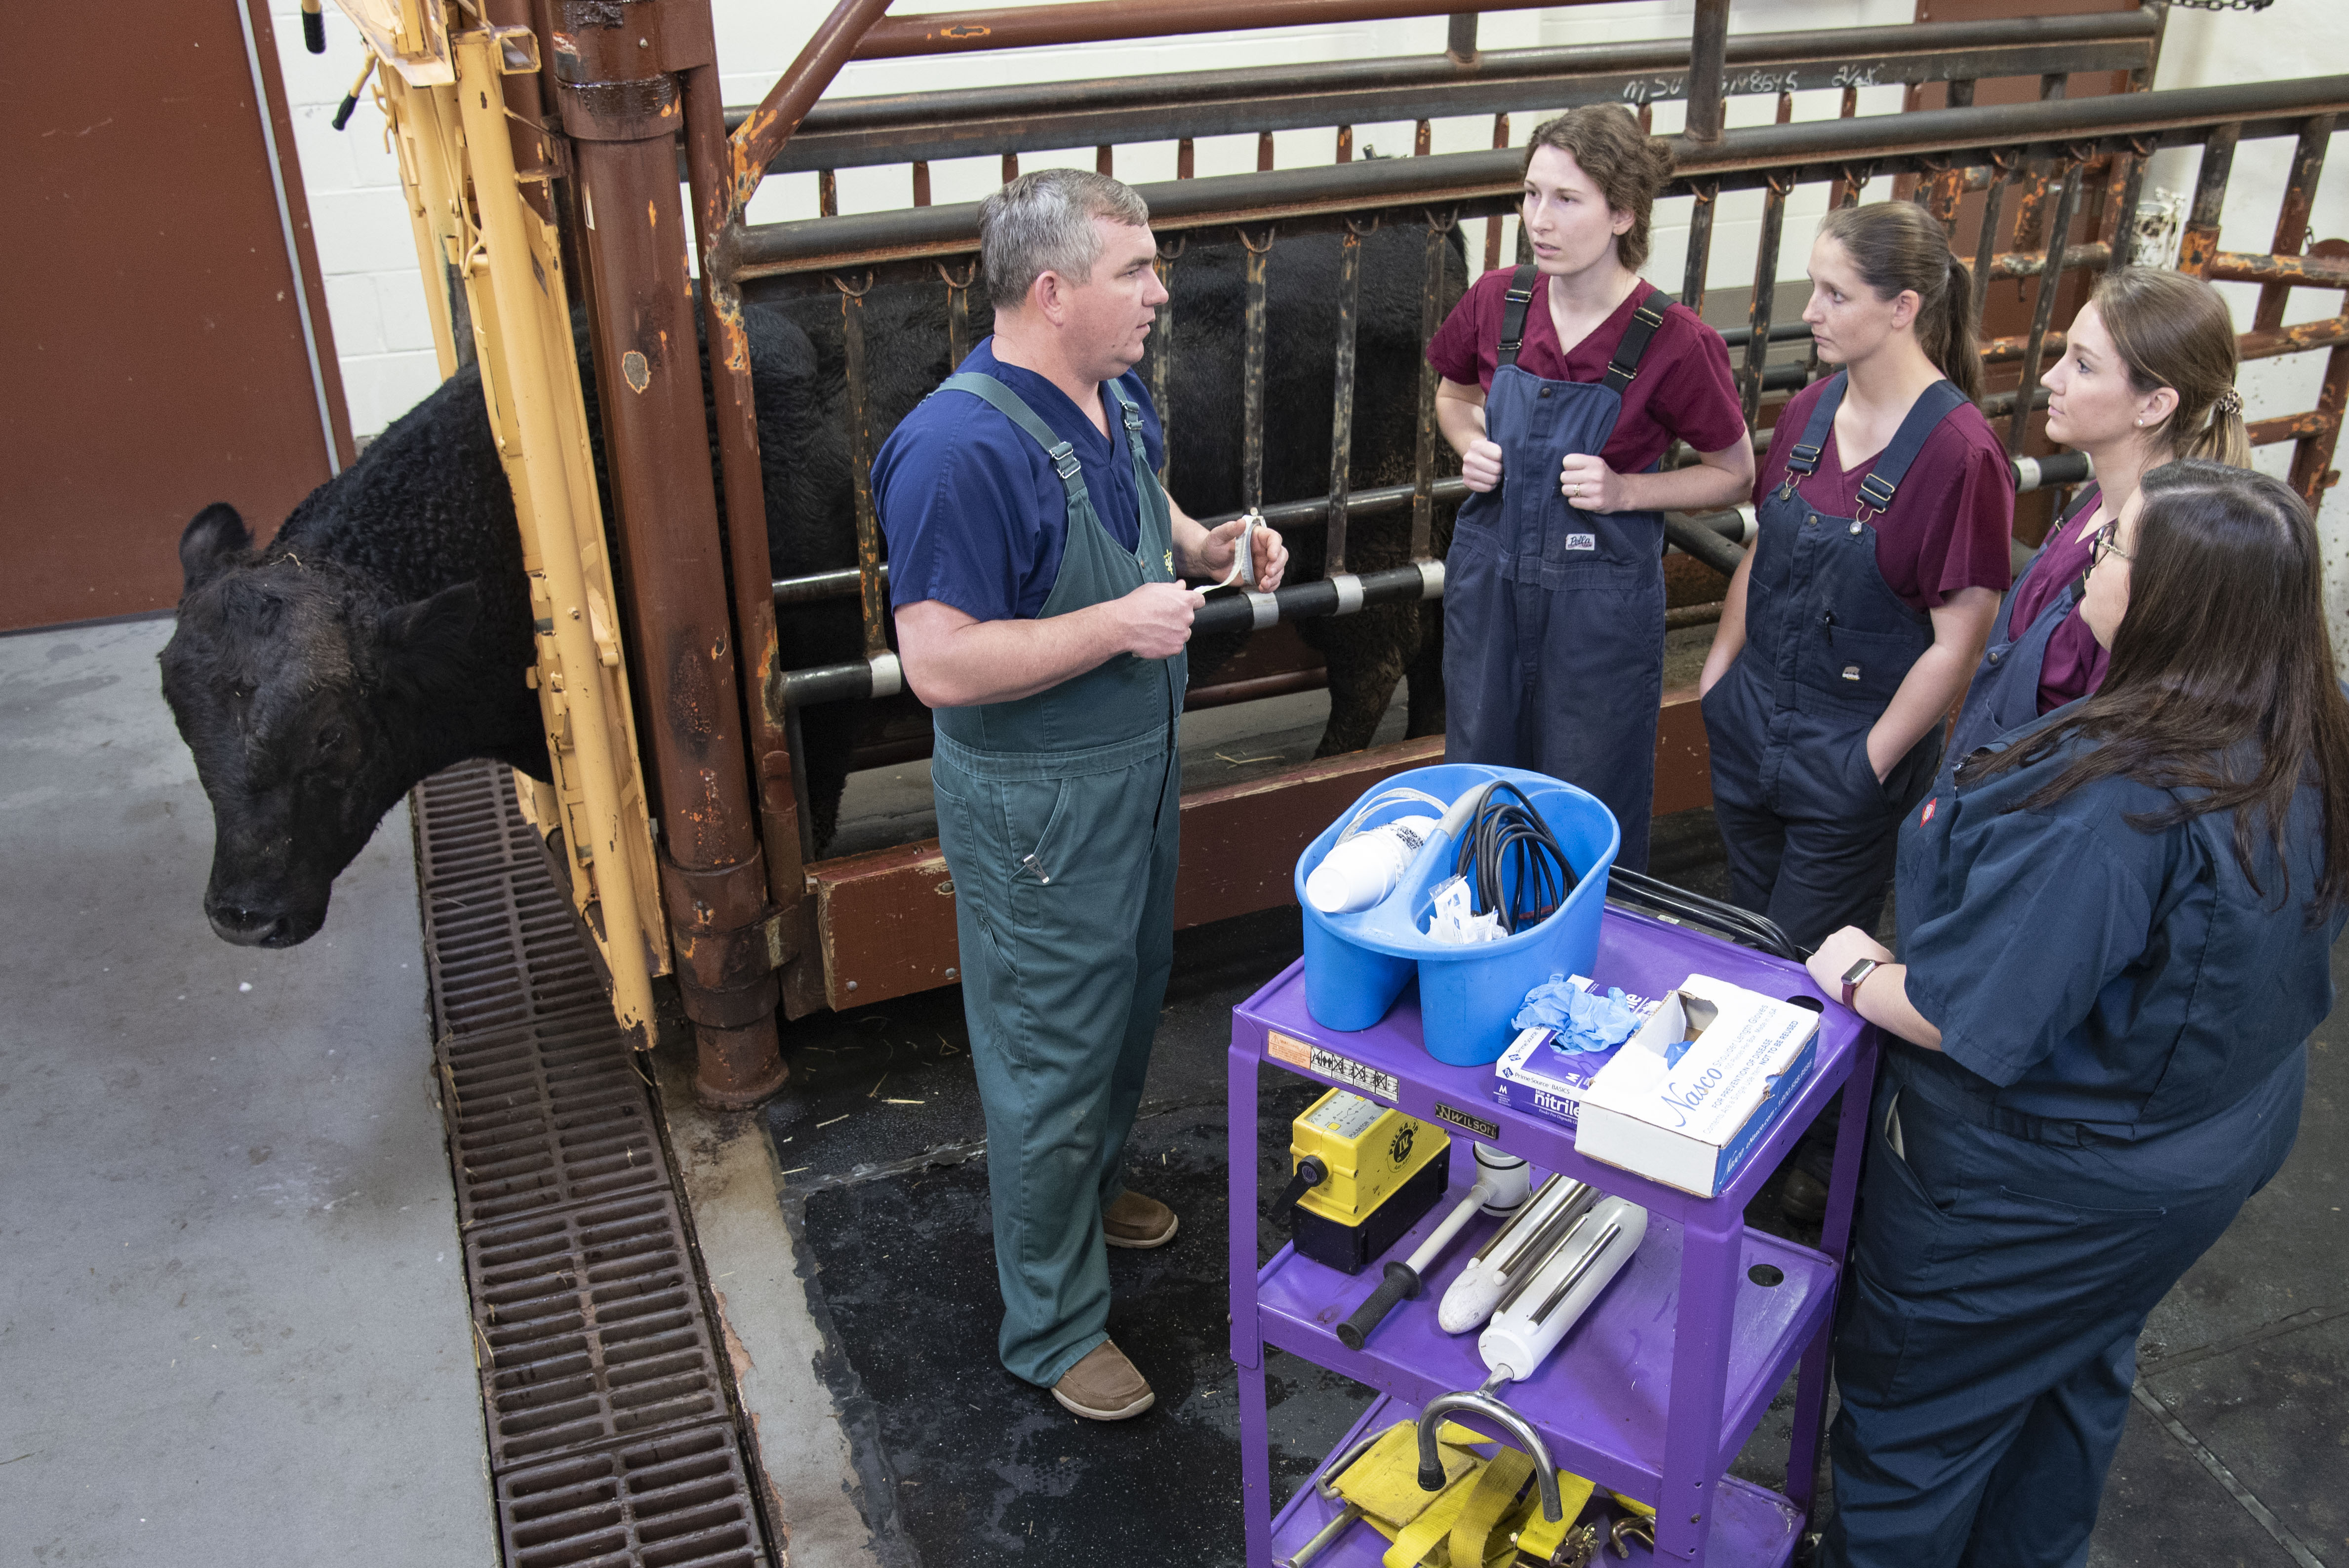 Veterinary students listen to their instructor before examining a cow